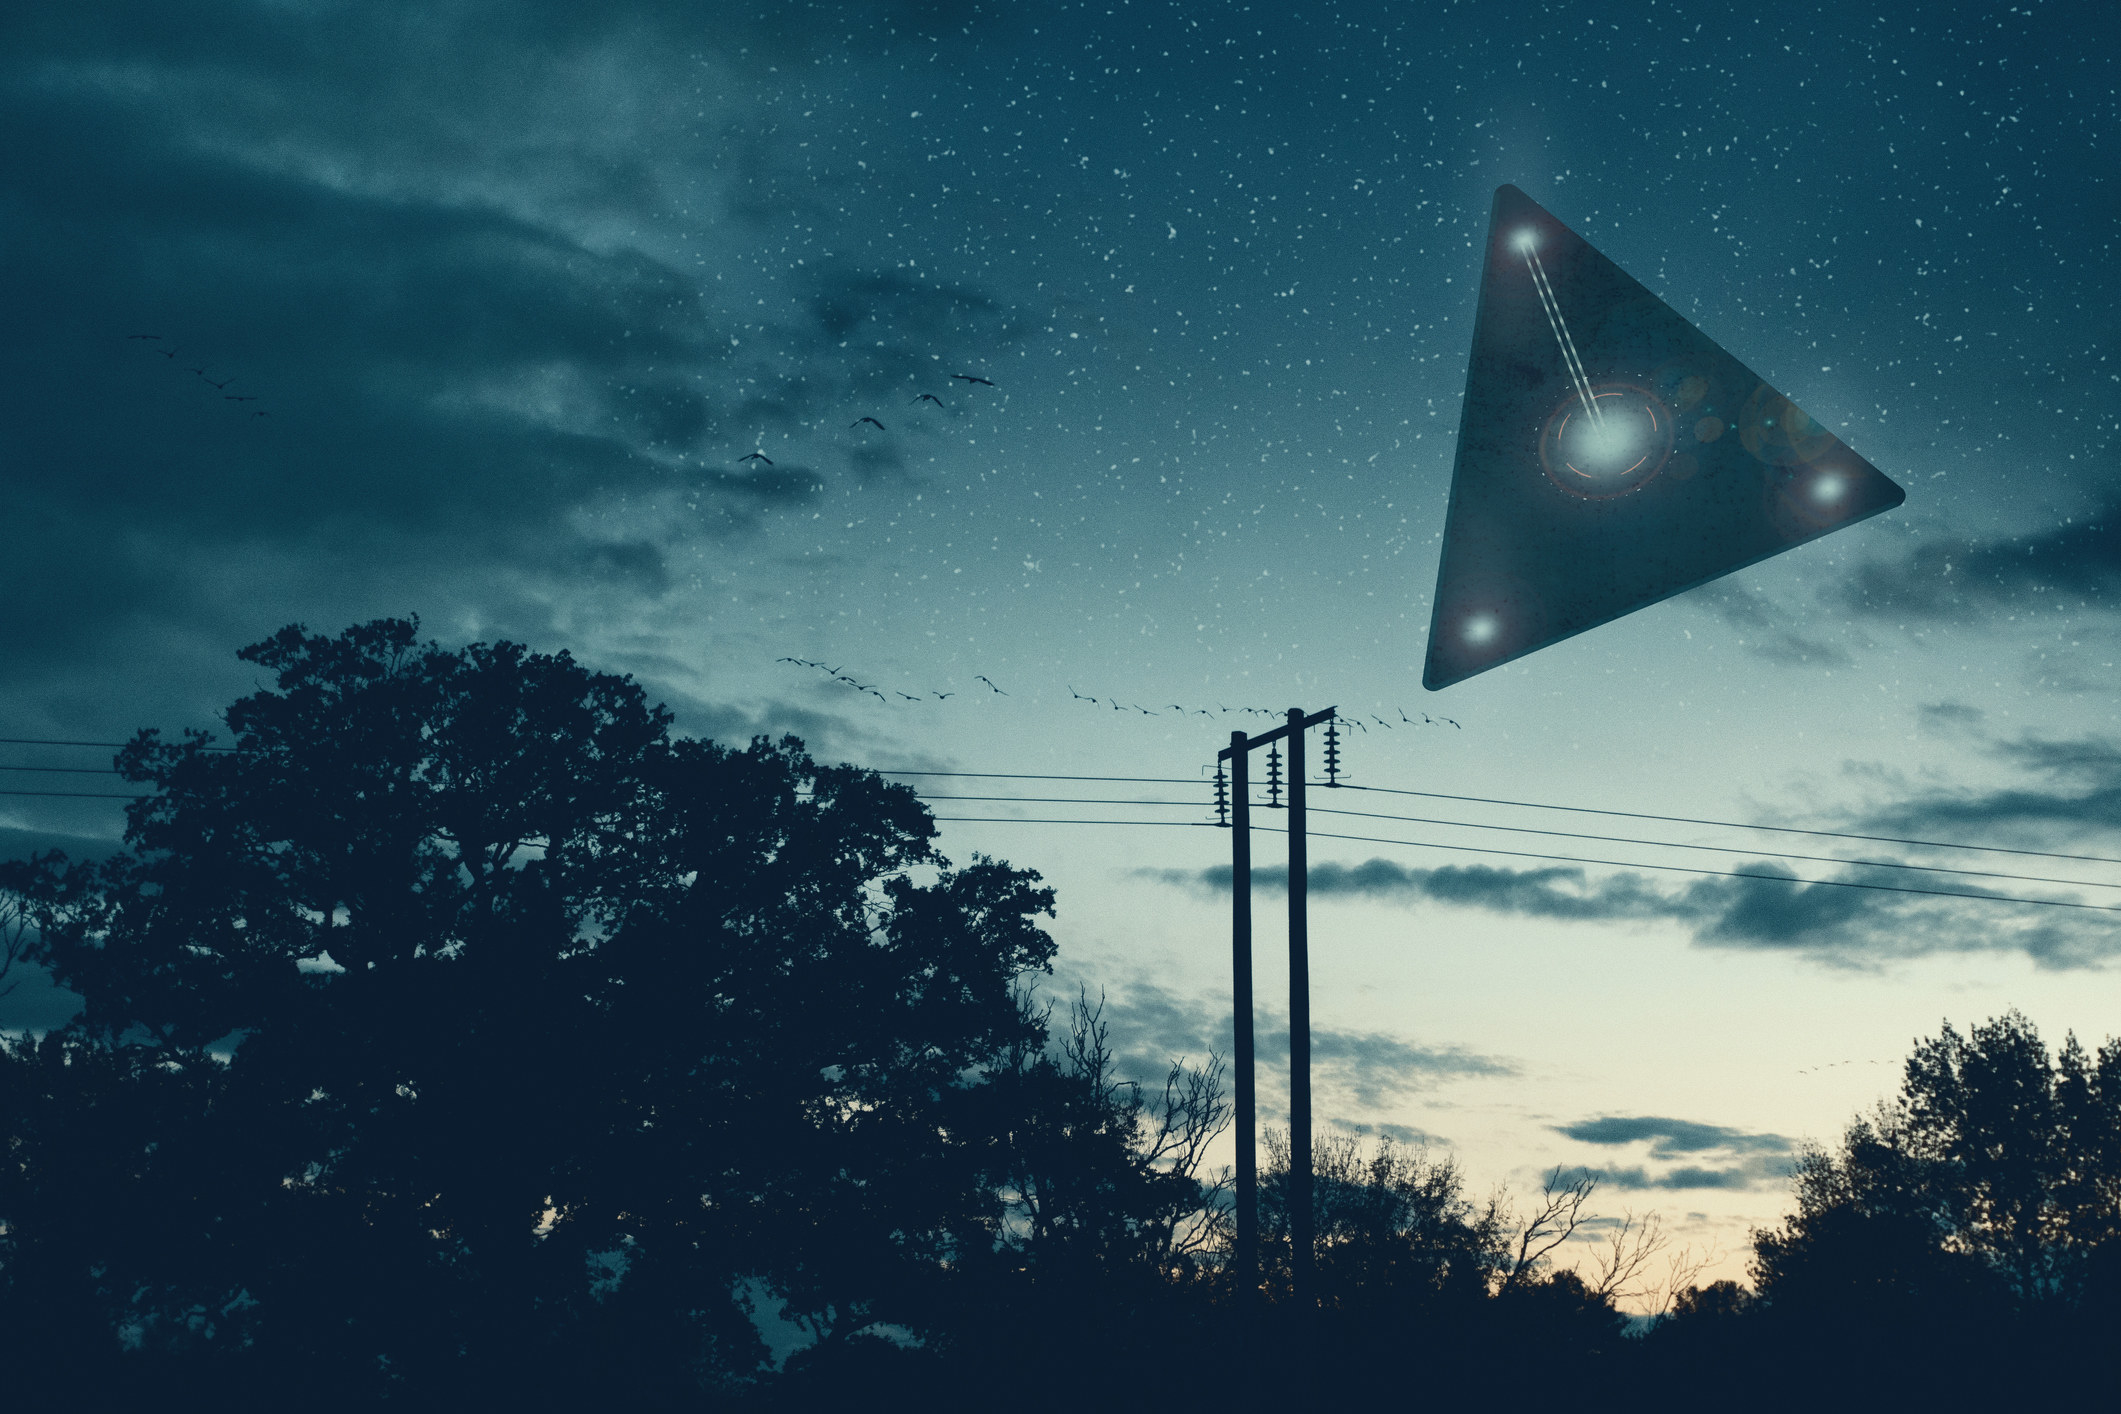 A triangular object in the sky